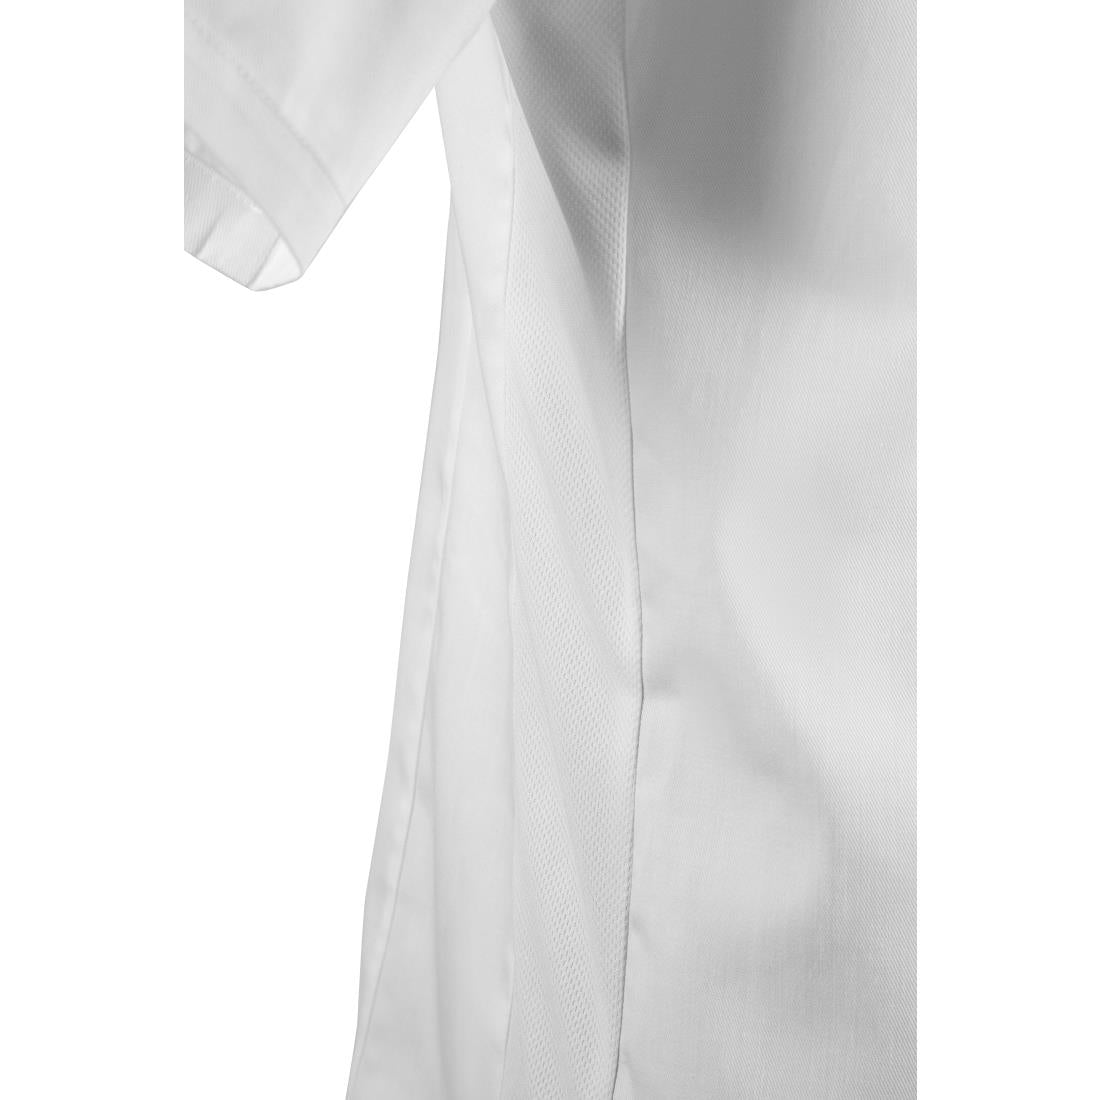 BB702-L Southside Band Collar Chefs Jacket White Size L JD Catering Equipment Solutions Ltd